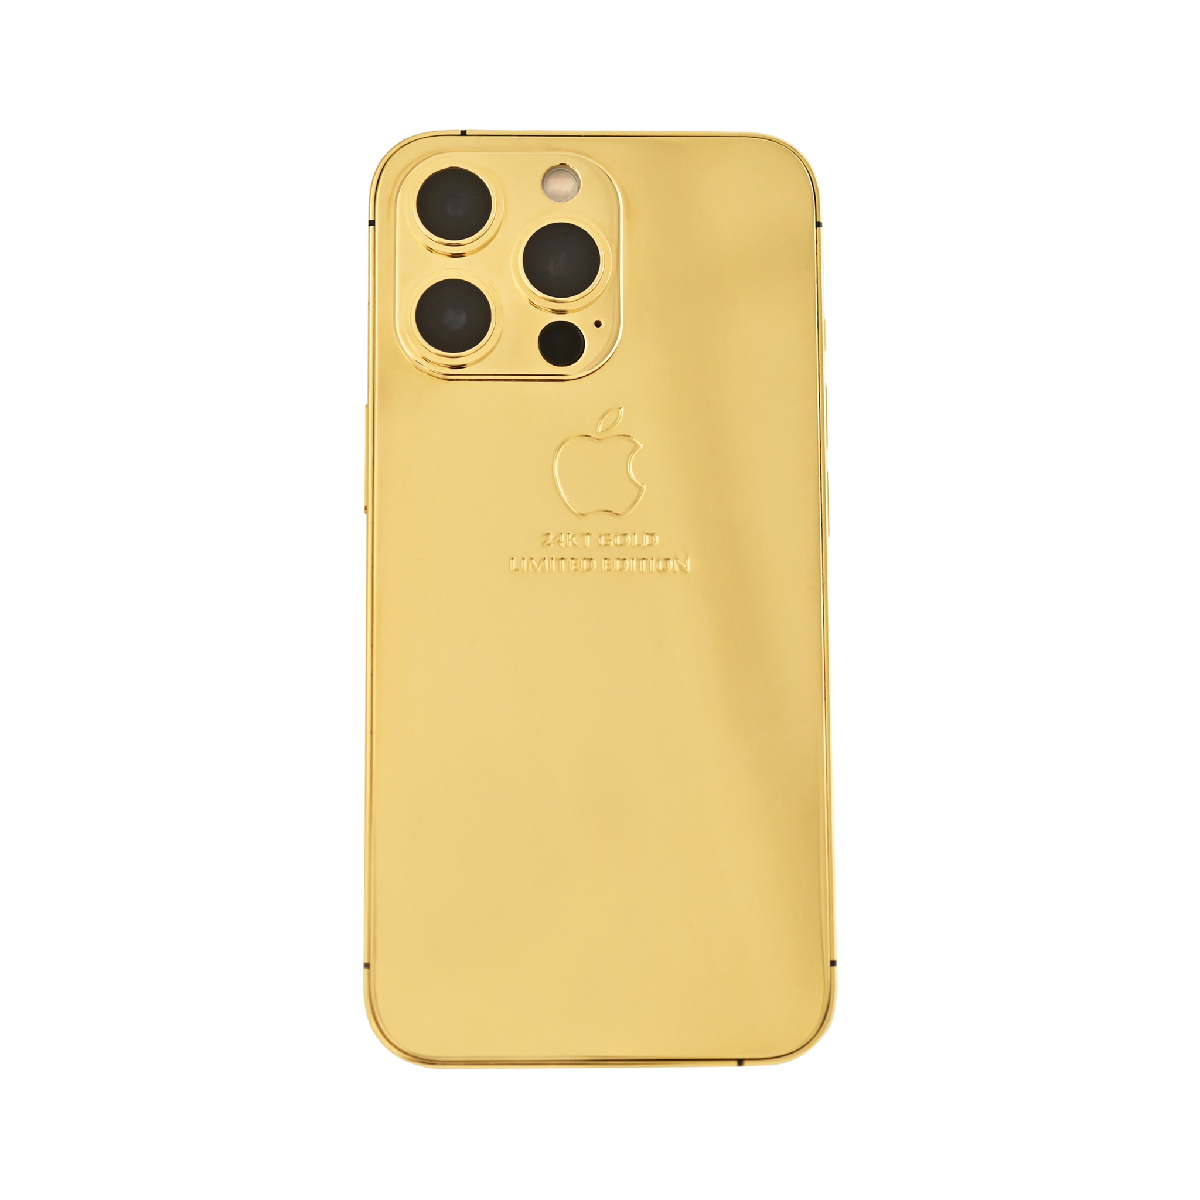 Caviar 24K Full Gold iPhone 13 Pro Limited Edition 512 GB